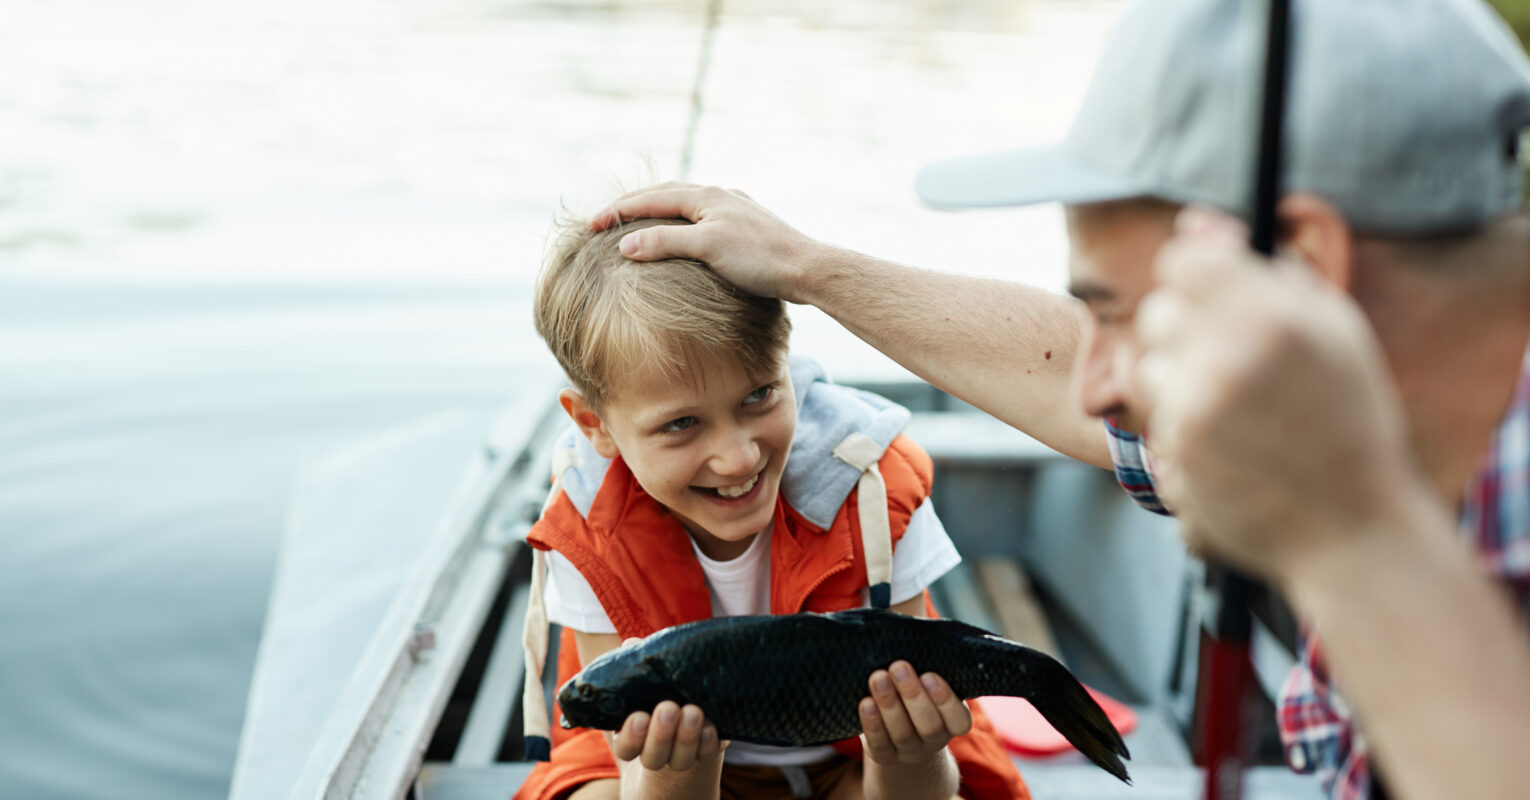 Going fishing this Easter? Check the rules before you go, The Senior